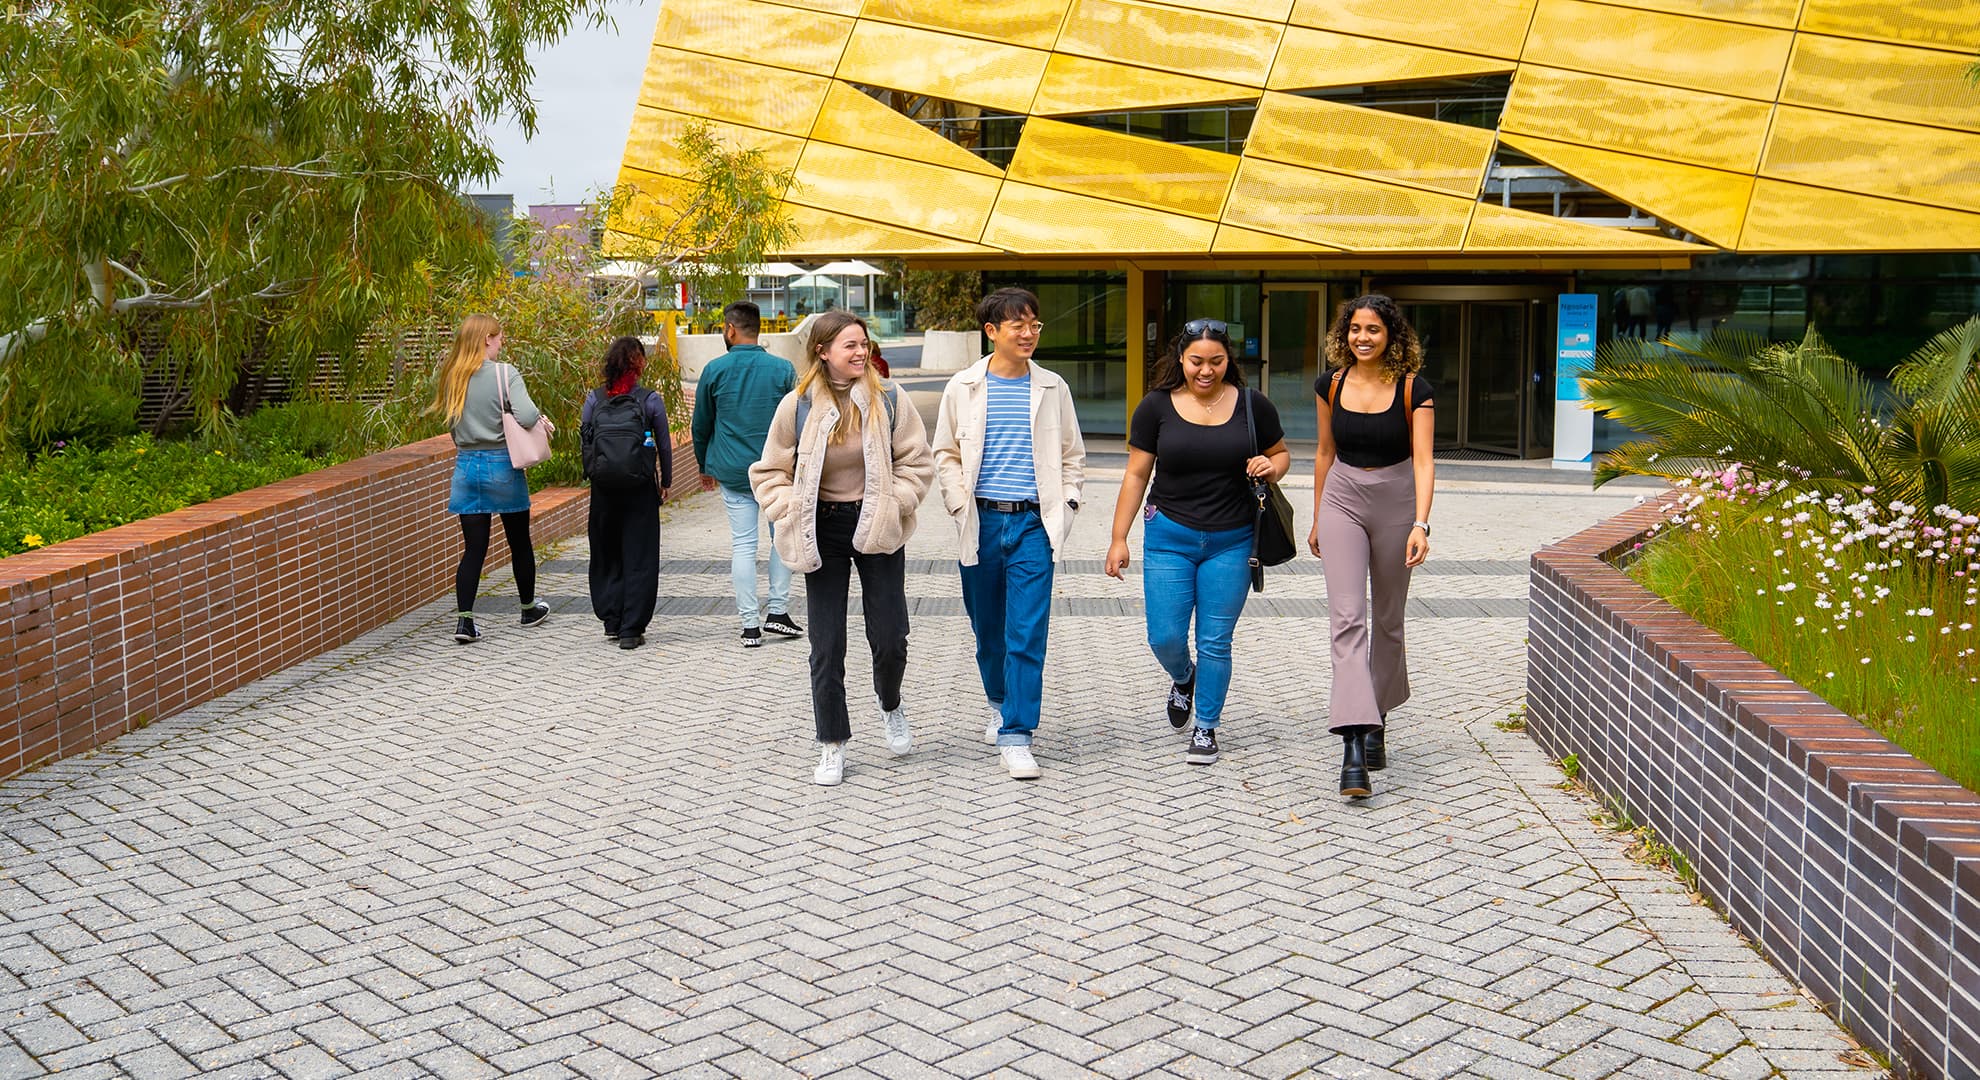 A group of Edith Cowan University students walking around Joondalup Campus. There is building in the background with gold geometric panelling.